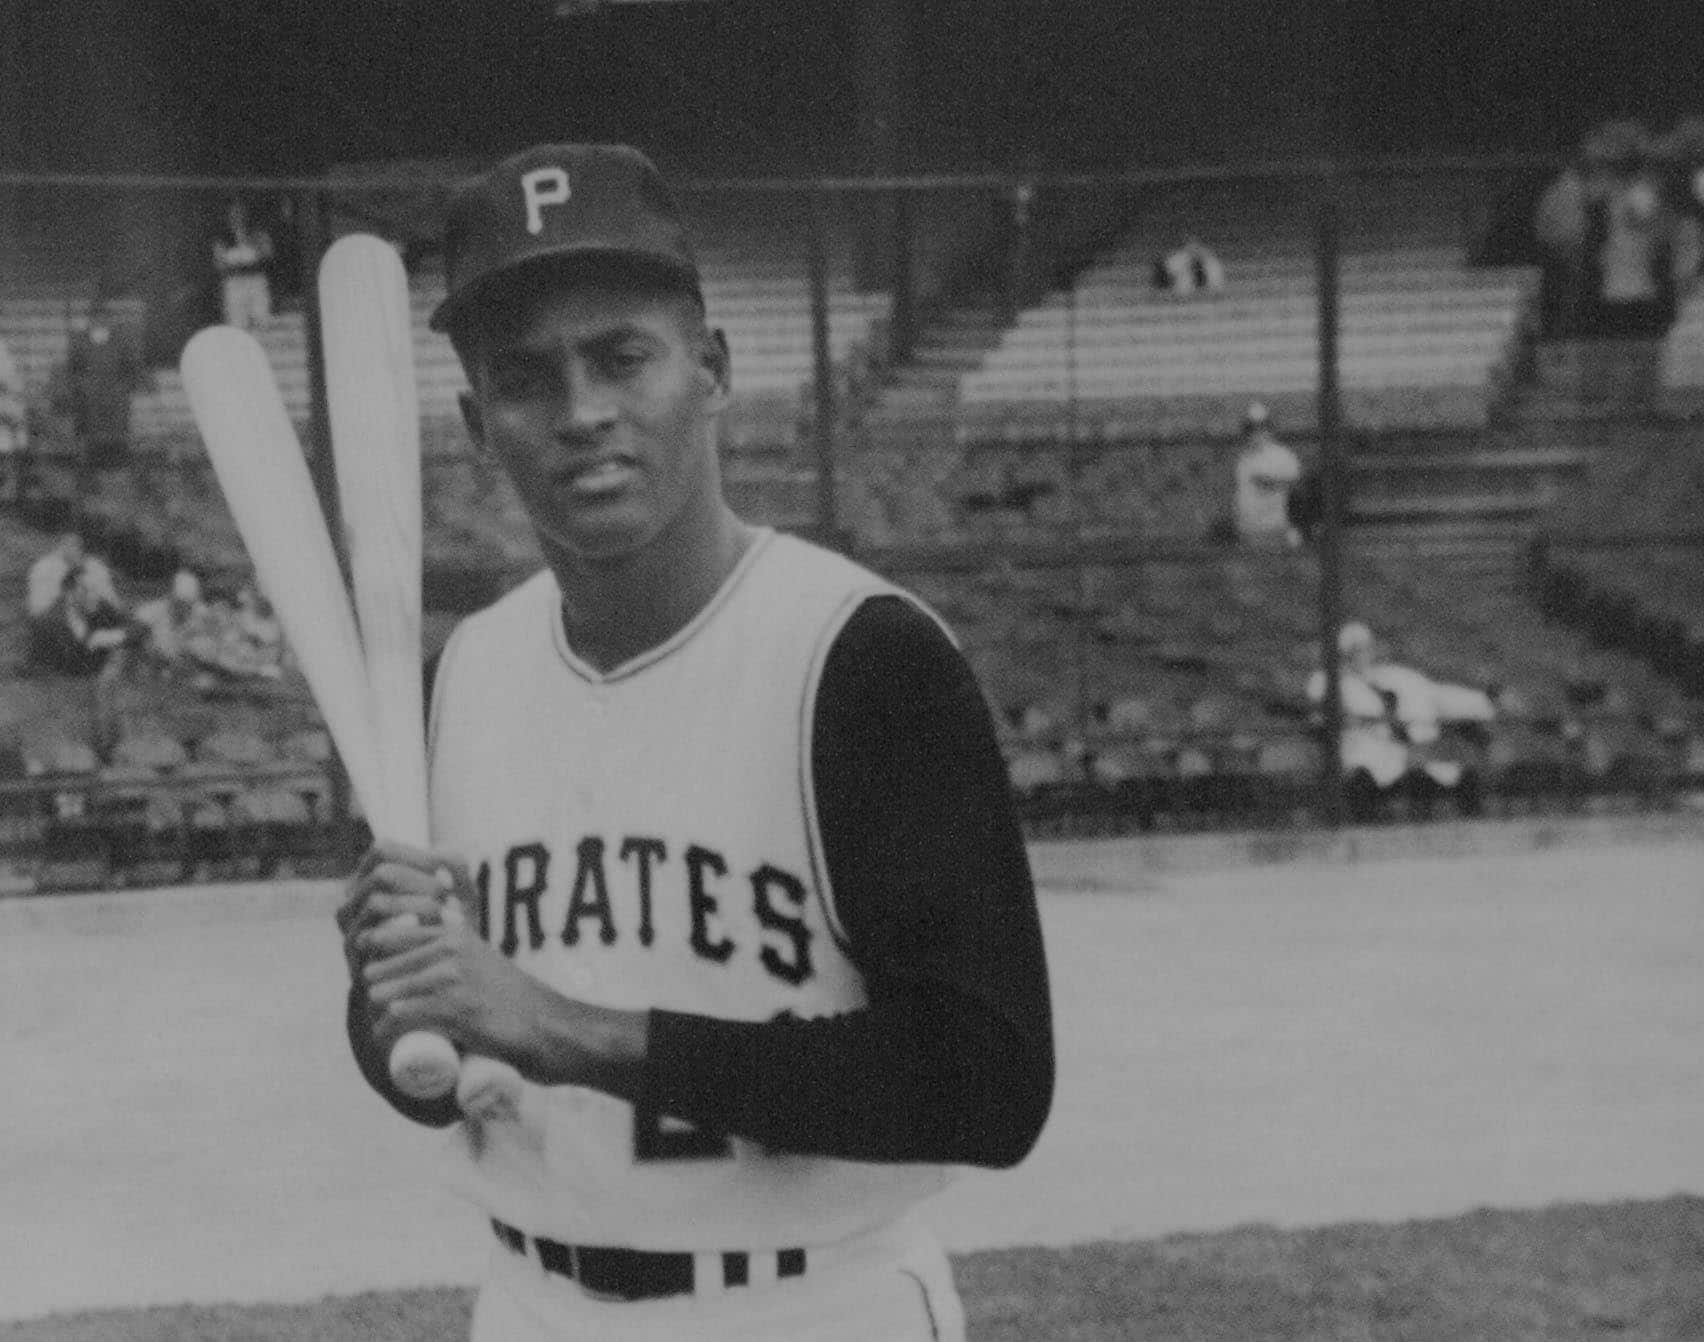 Roberto Clemente as influential as ever 50 years after death - Los Angeles  Times